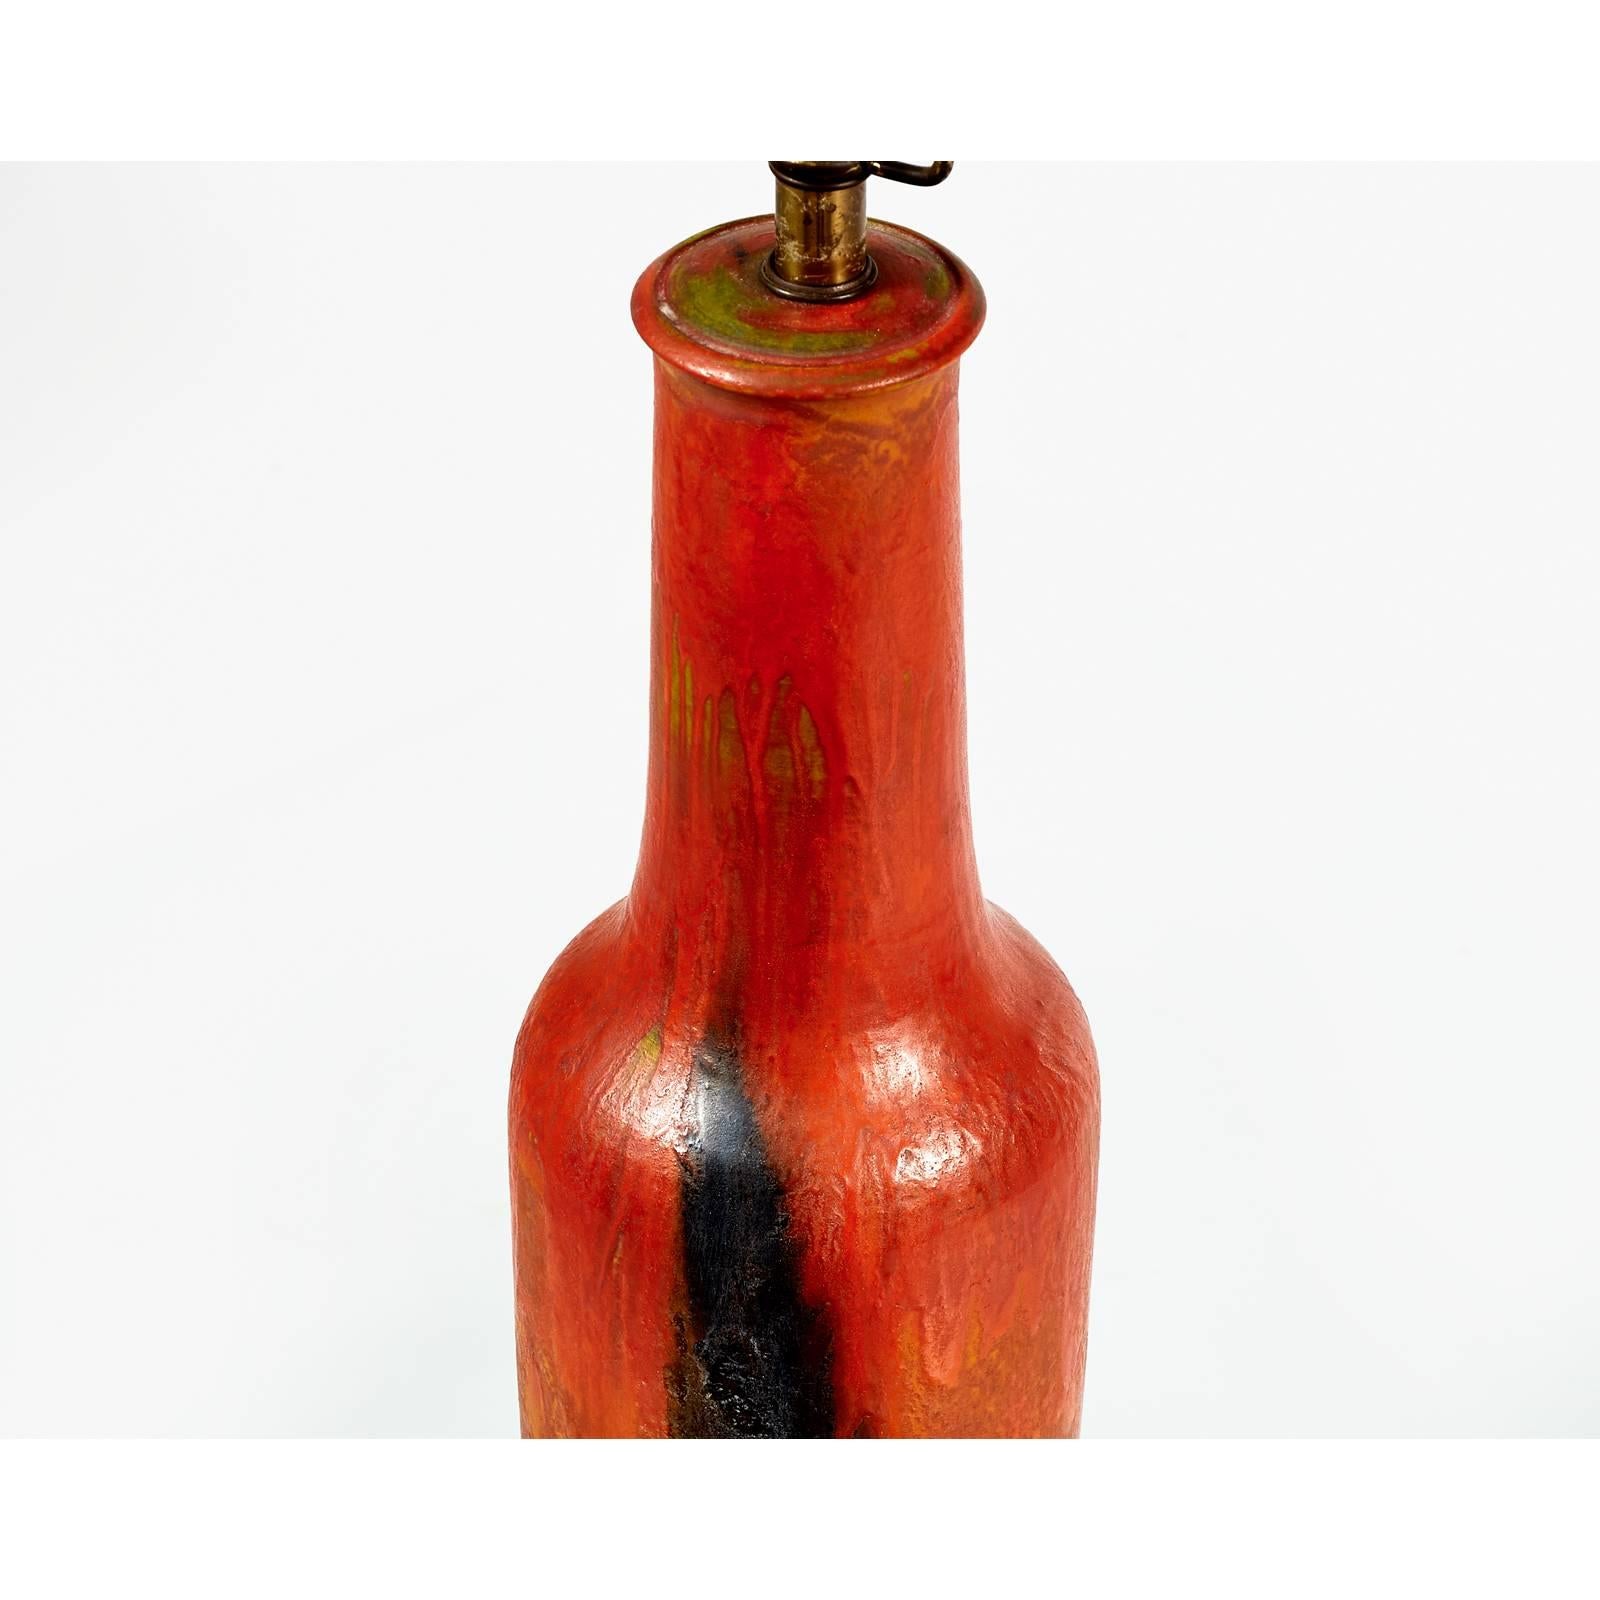 You are viewing a very rich looking and handmade fired Italian pottery lamp with reddish orange, green and black hues, circa 1950s-early 1960s. This particle lamp was acquired in Westchester, N.Y. from a designers home that included Mid-Century